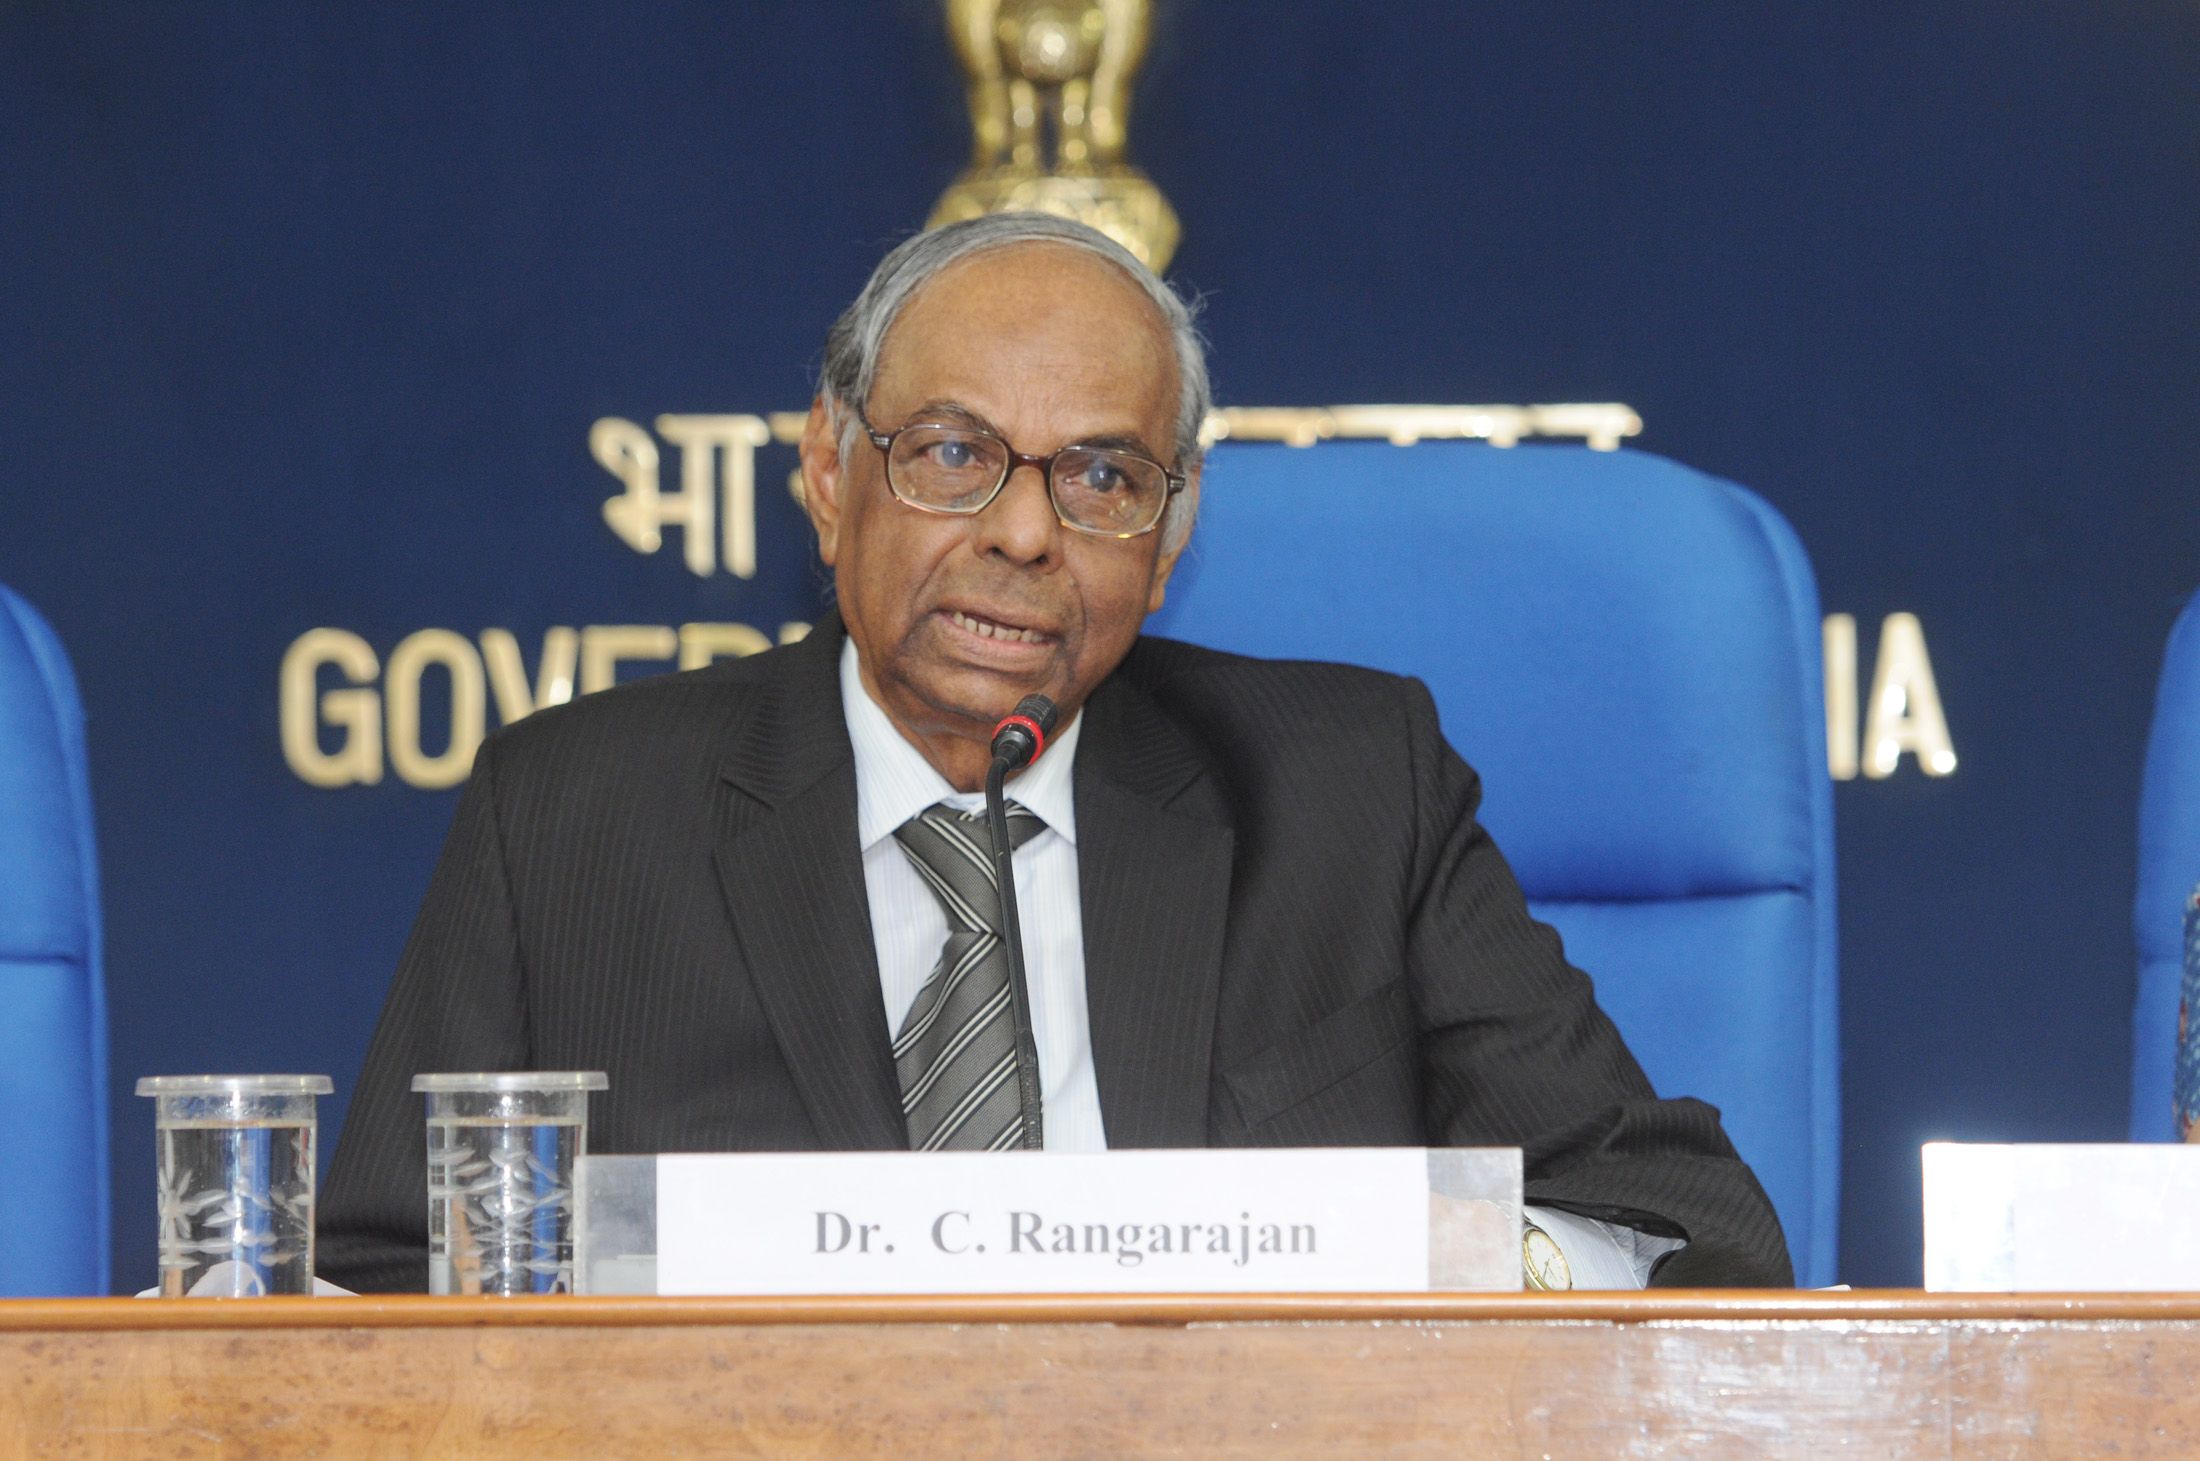 With 8-9% growth, it will take 20 years for India to become a developed nation: Former RBI chief